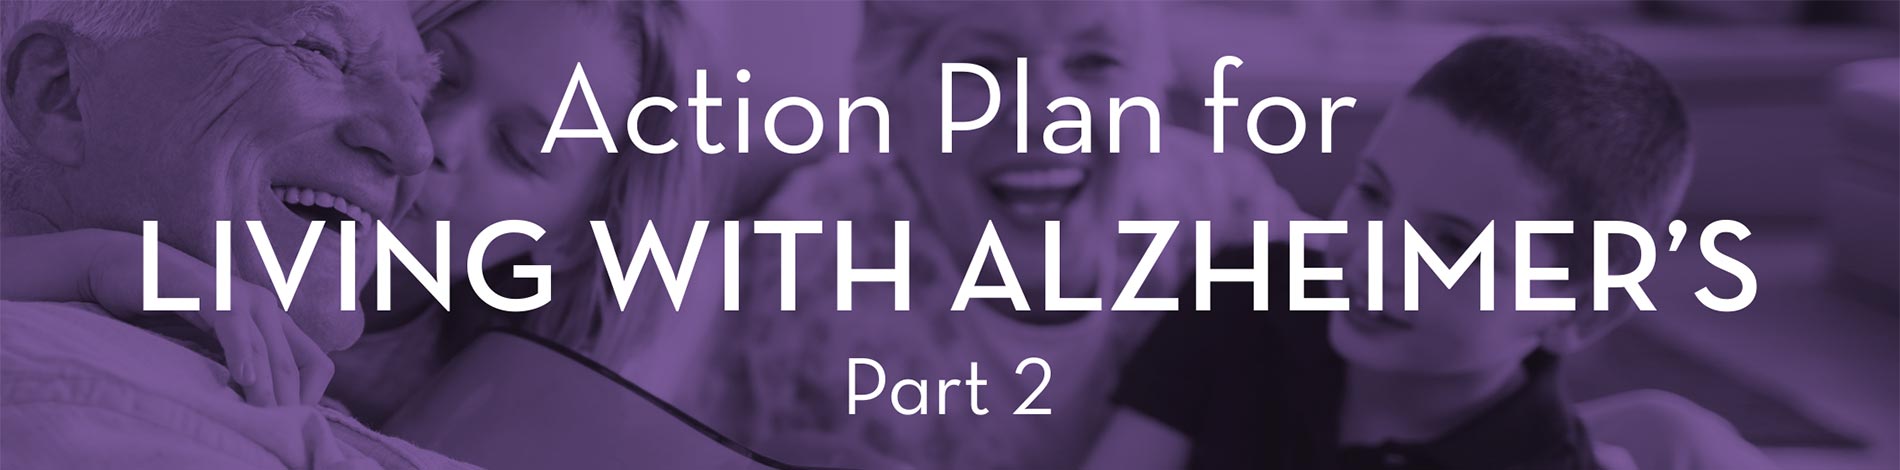 Action Plan for Living with Alzheimers